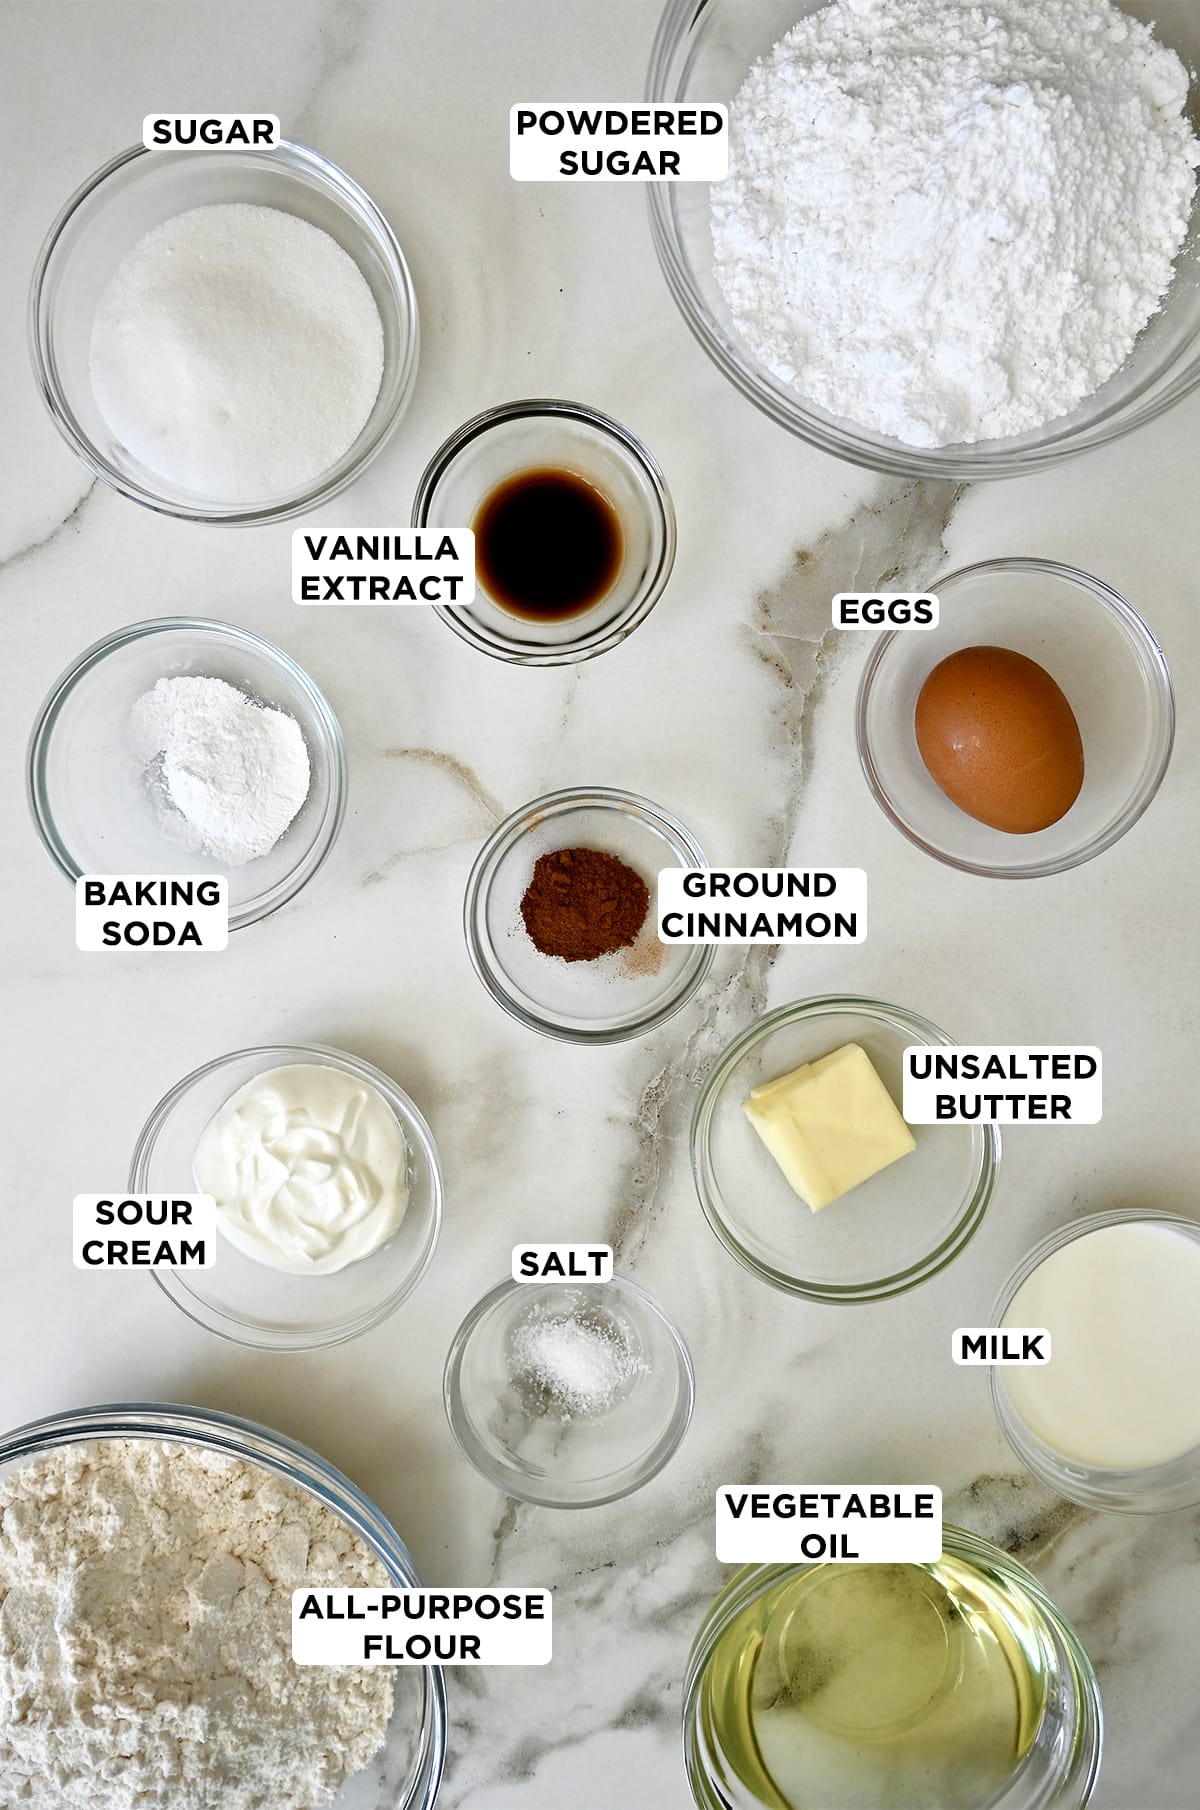 Various sizes of clear bowl containing powdered sugar, an egg, unsalted butter, milk, vegetable oil, salt, flour, sour cream, baking soda, vanilla extract and granulated sugar.